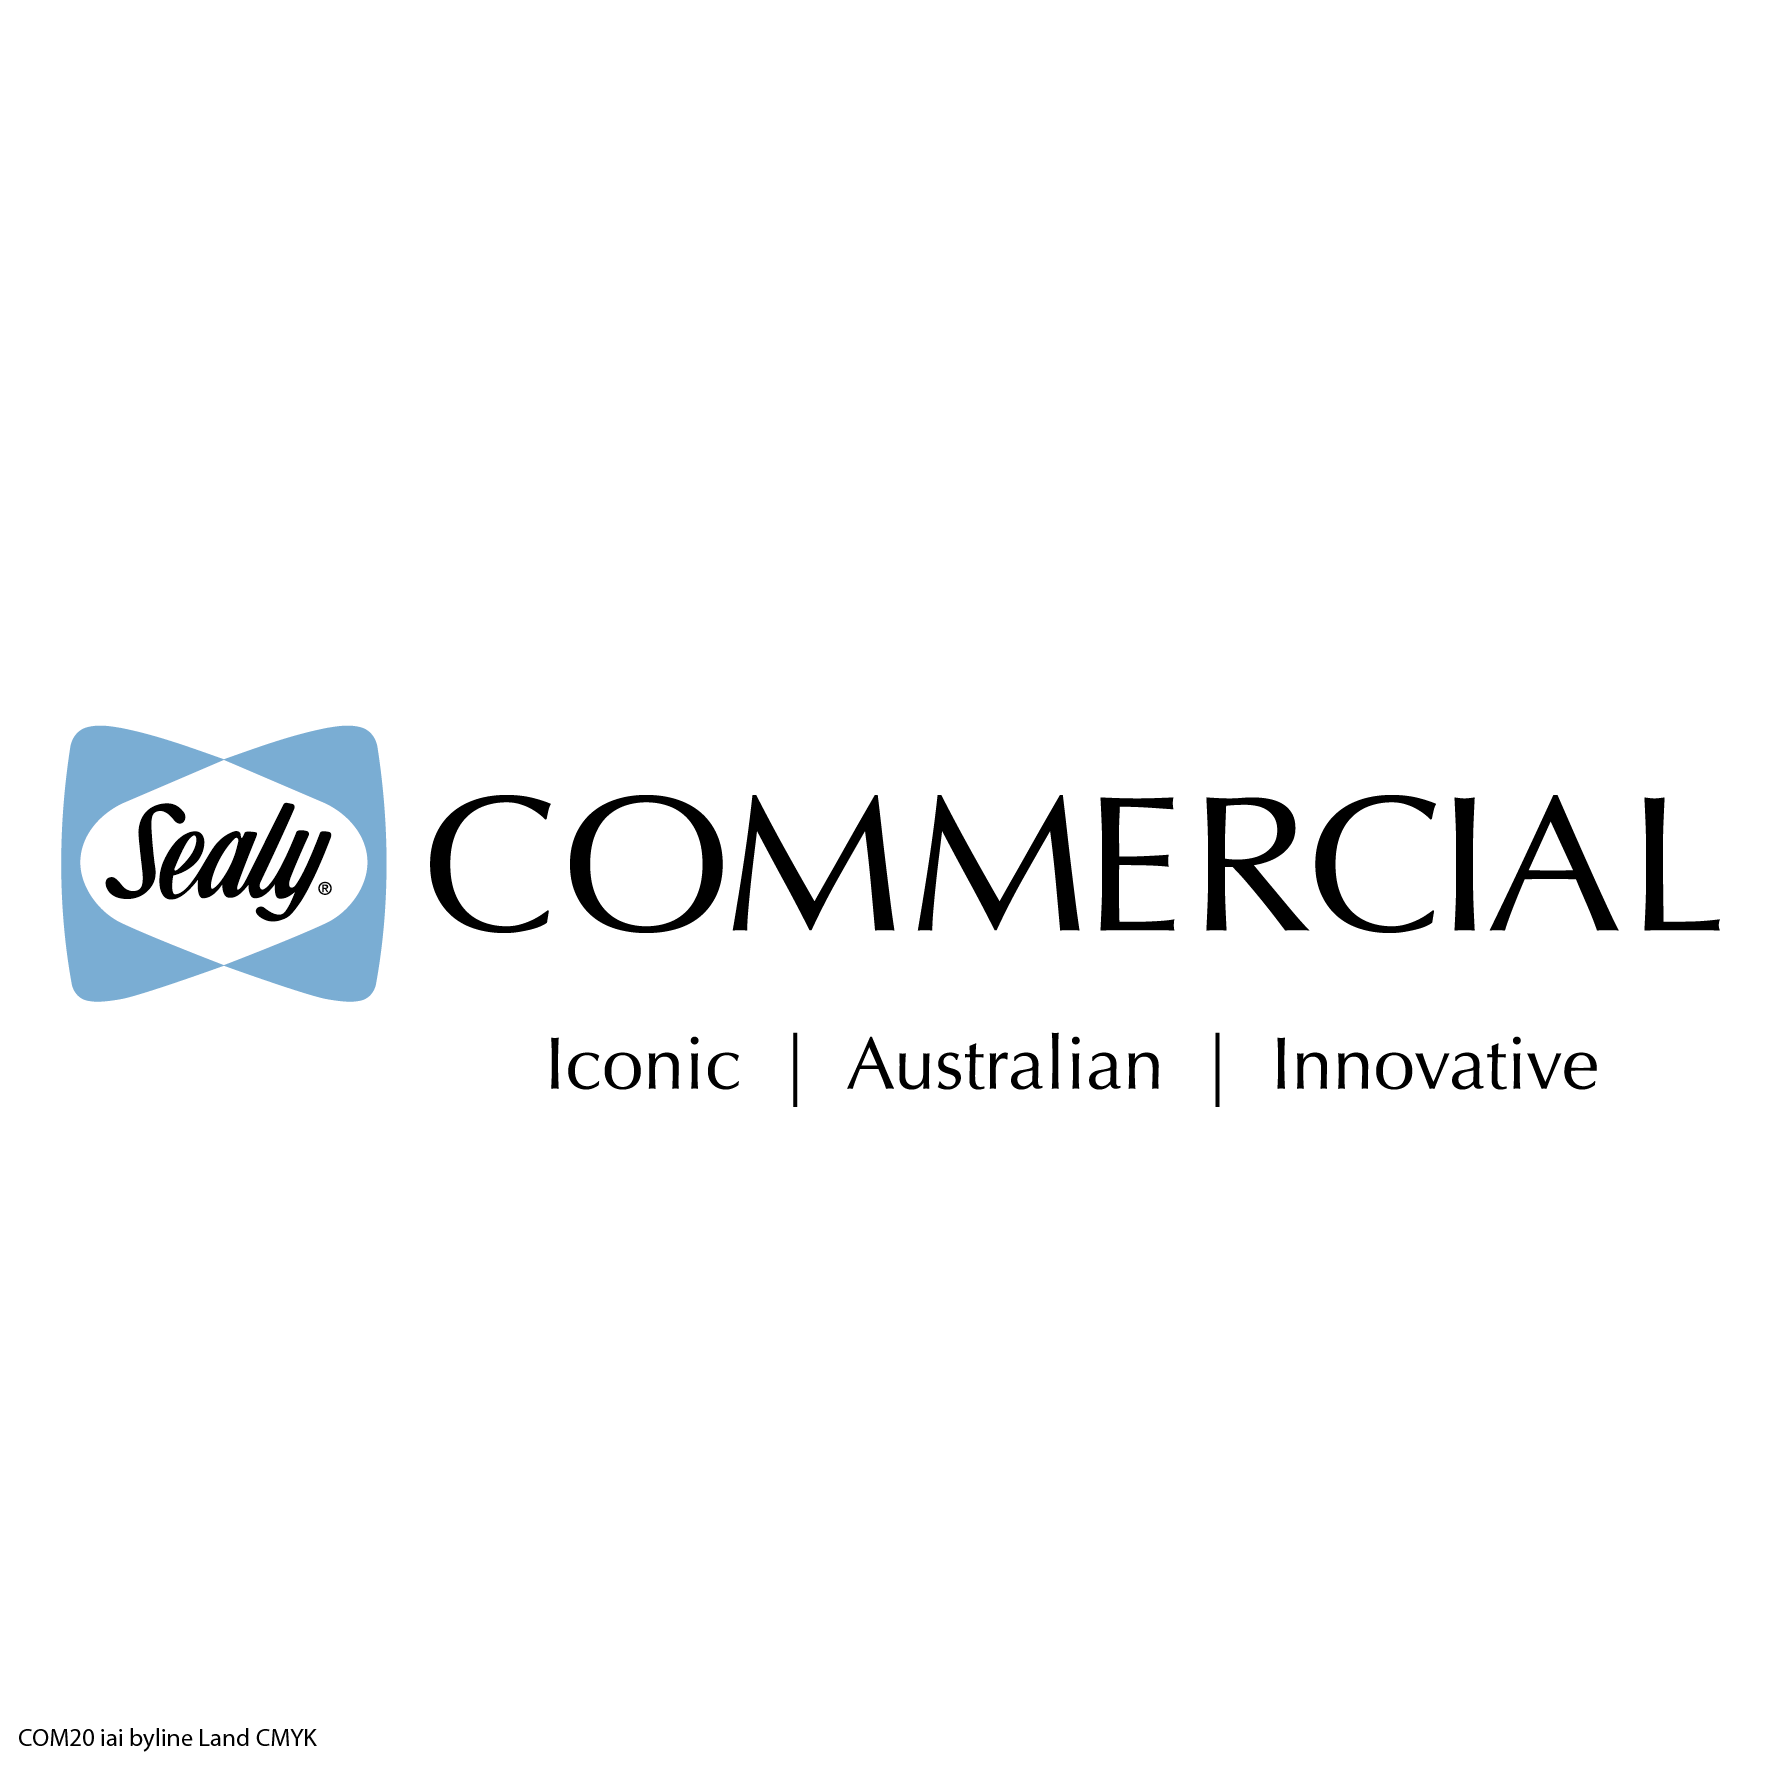 Sealy Commercial